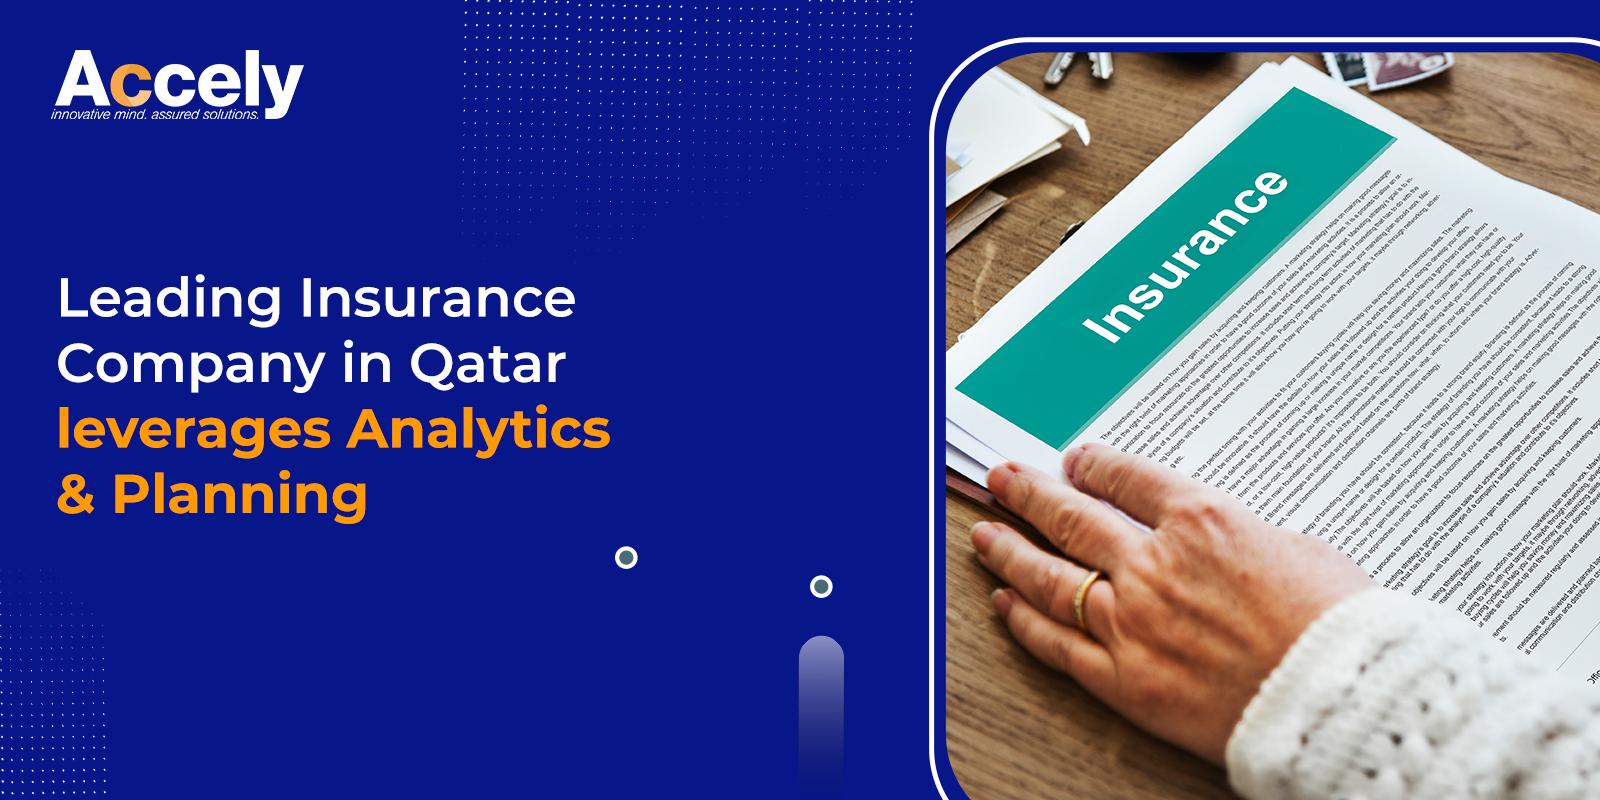 Leading Insurance Company in Qatar leverages Analytics & Planning